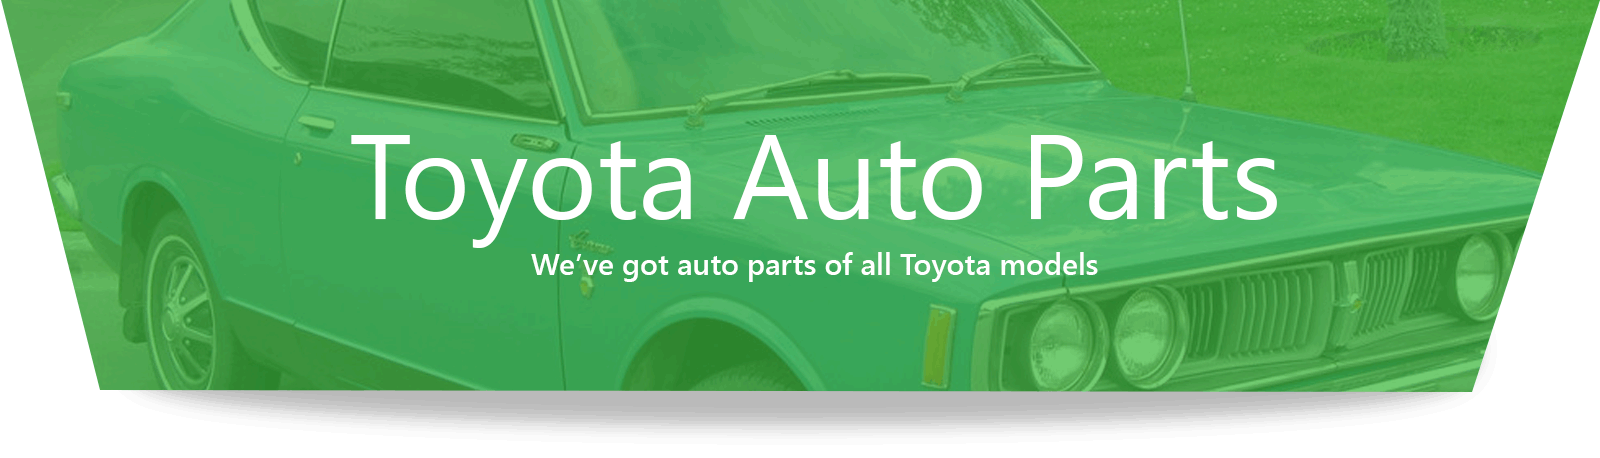 Toyota Used Auto Parts Auckland | Second Hand Toyota Car Parts NZ